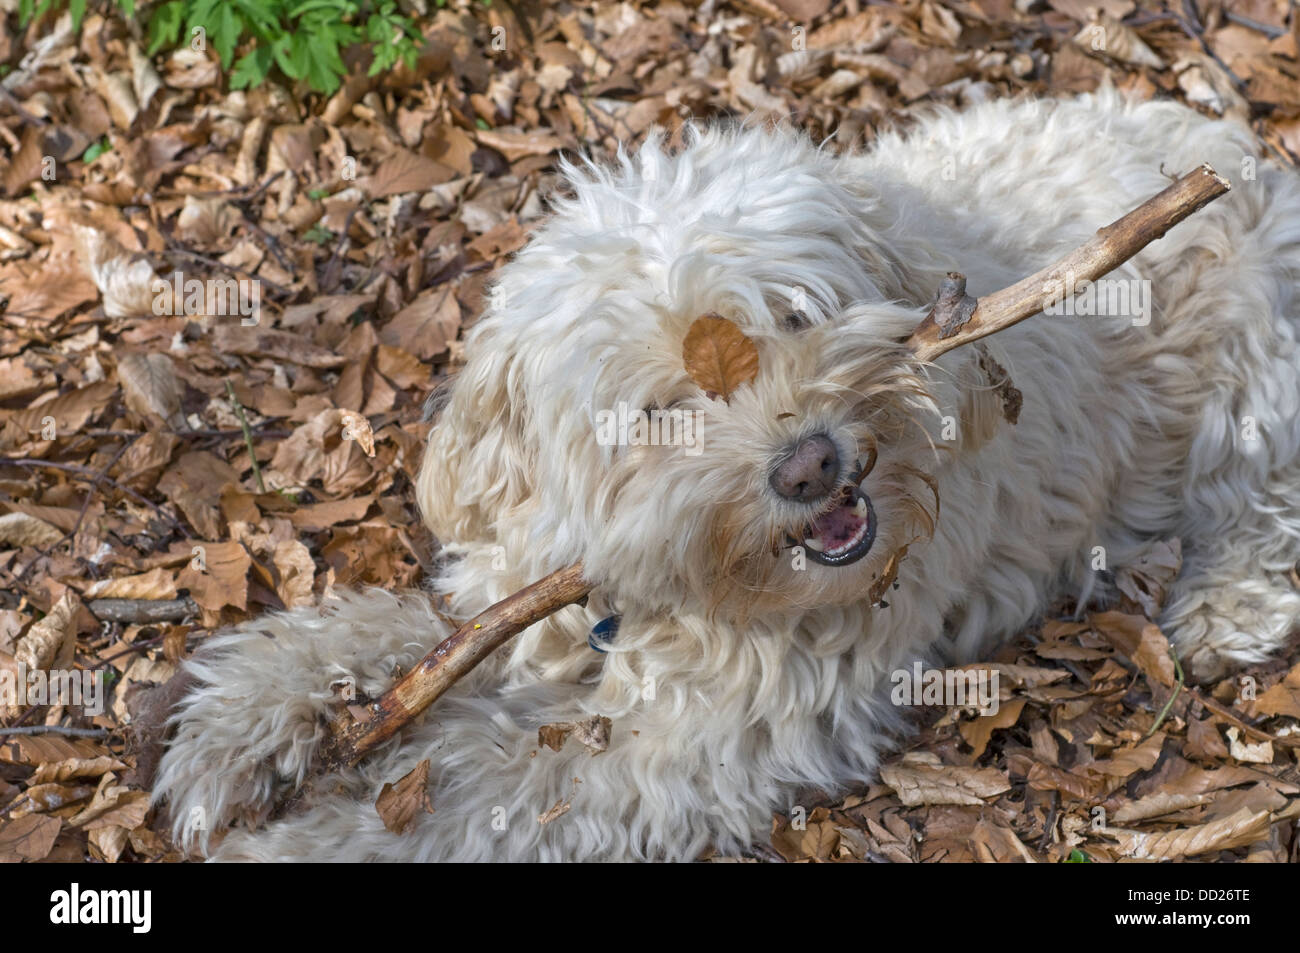 Cute dog with leaf on face chewing a stick. Stock Photo